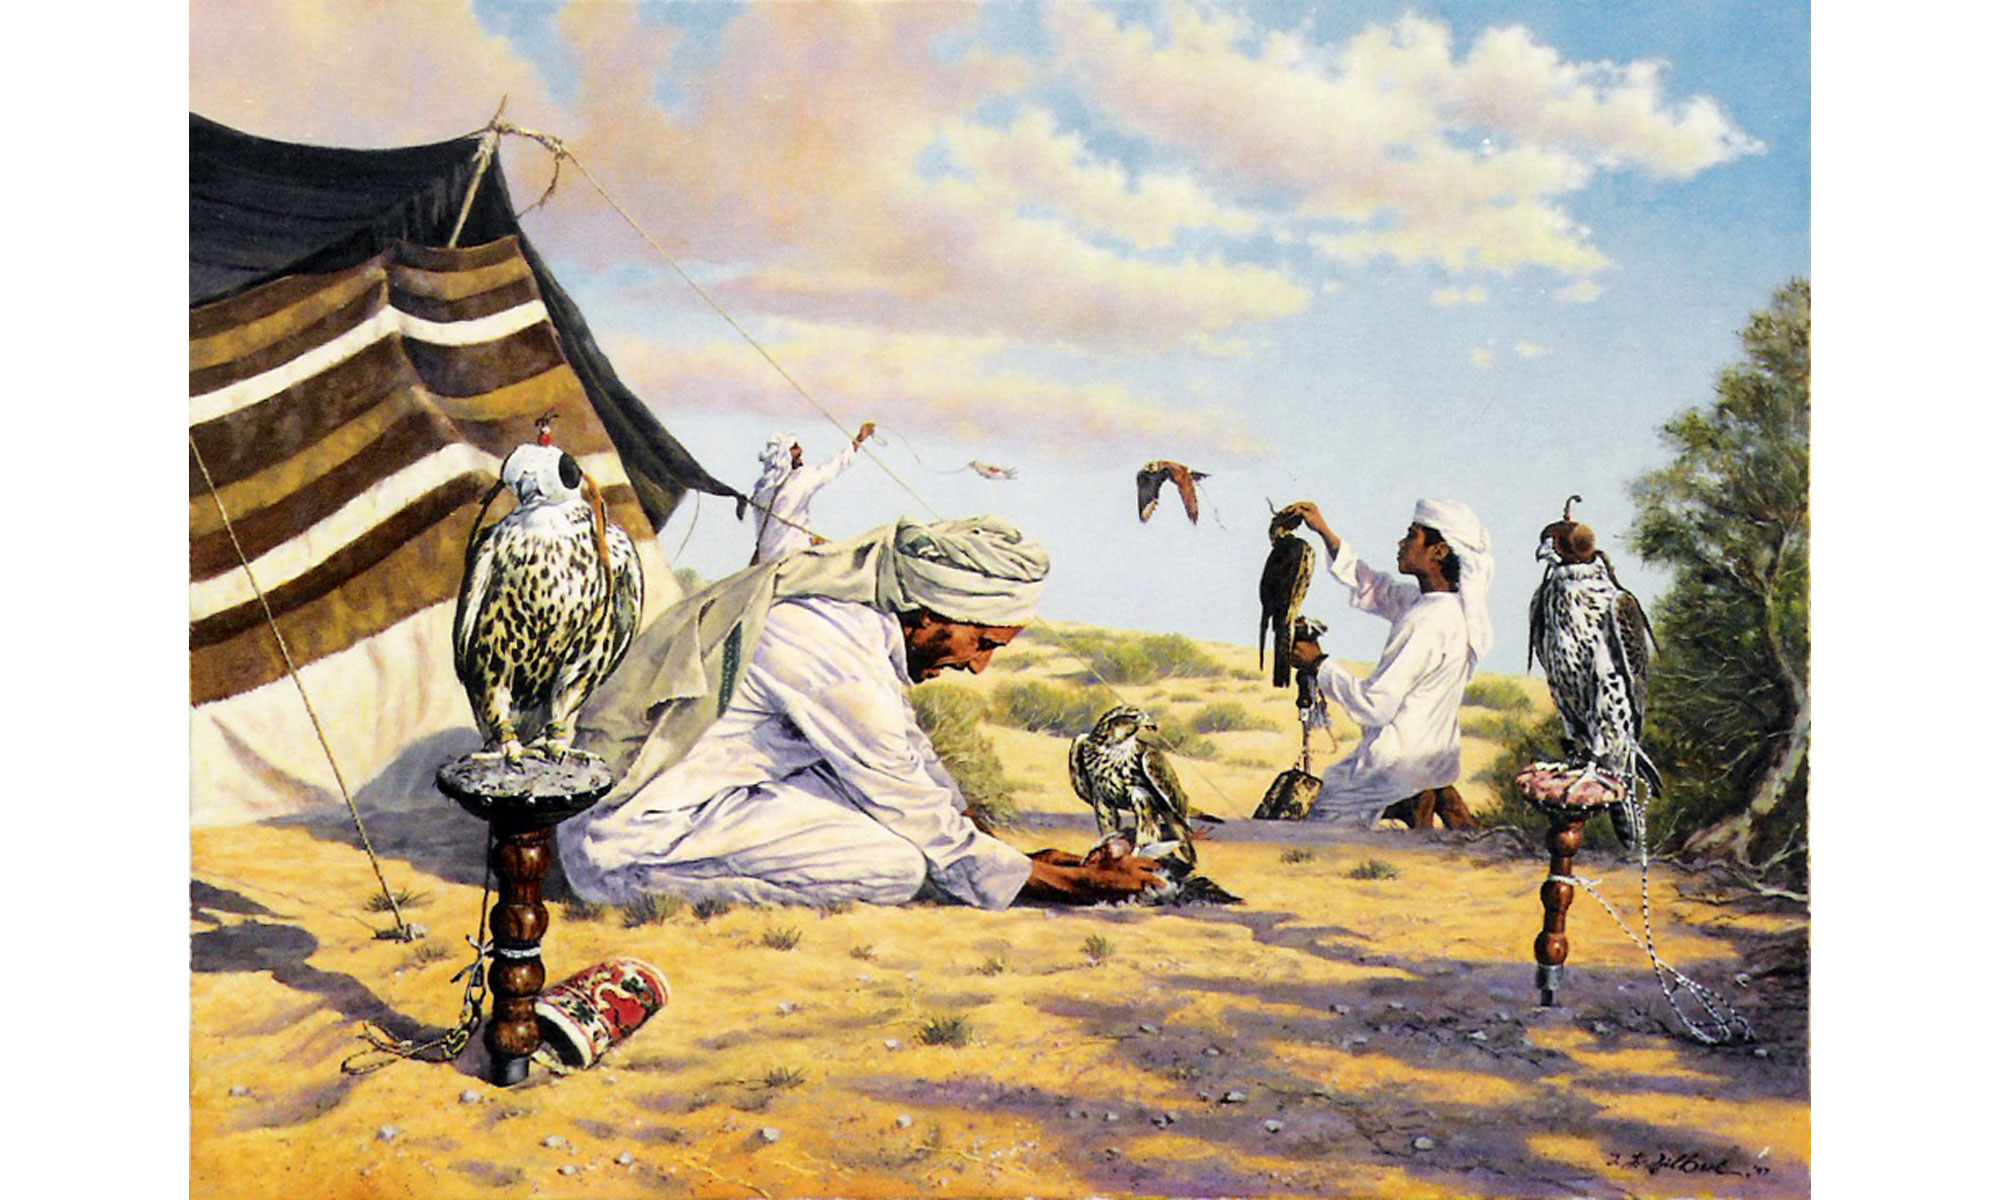 Falconers Painting by Terence J Gilbert Oil on Board